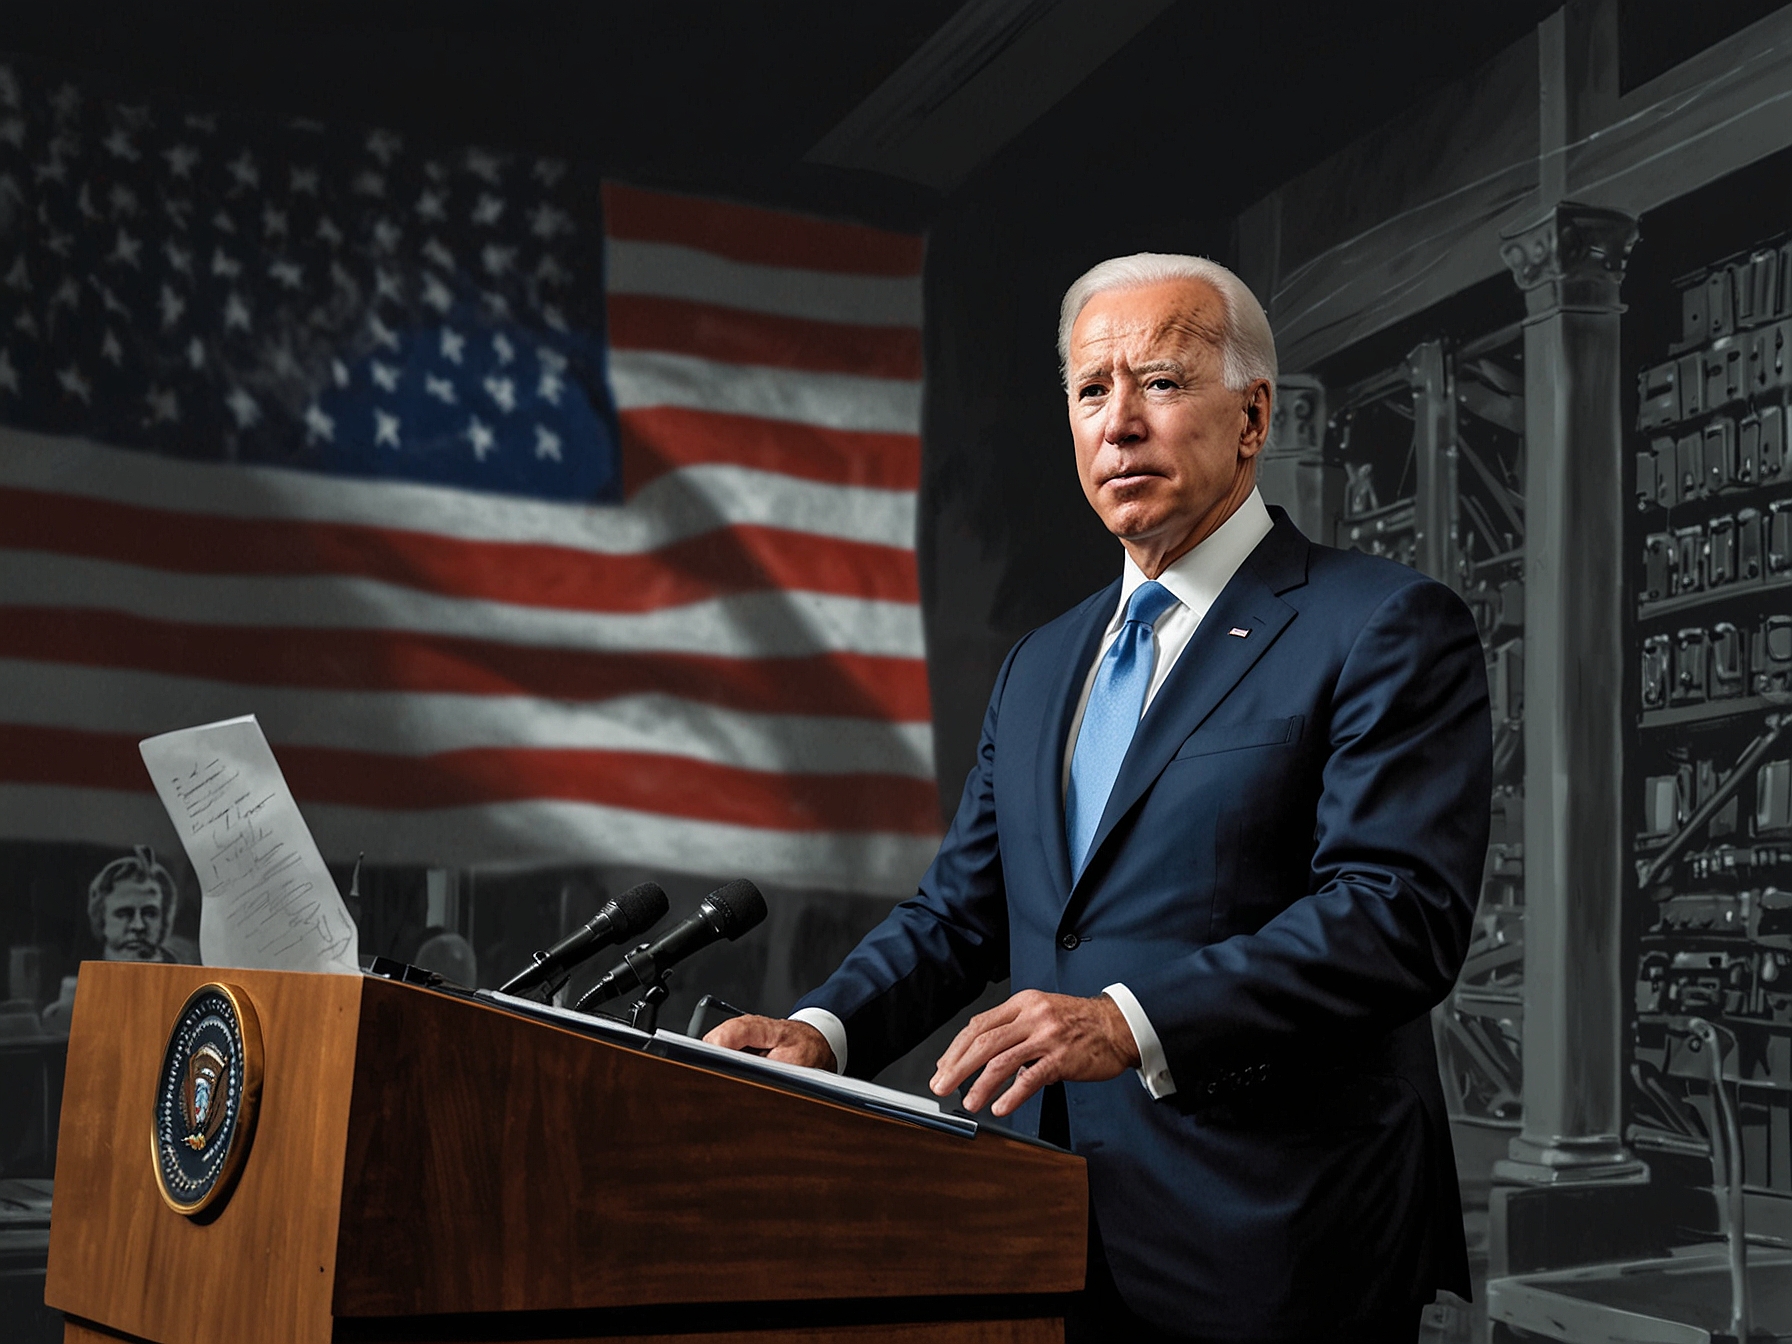 President Joe Biden officially announcing the ban on Kaspersky software, highlighting the urgent need to safeguard national cybersecurity infrastructure from potential threats.